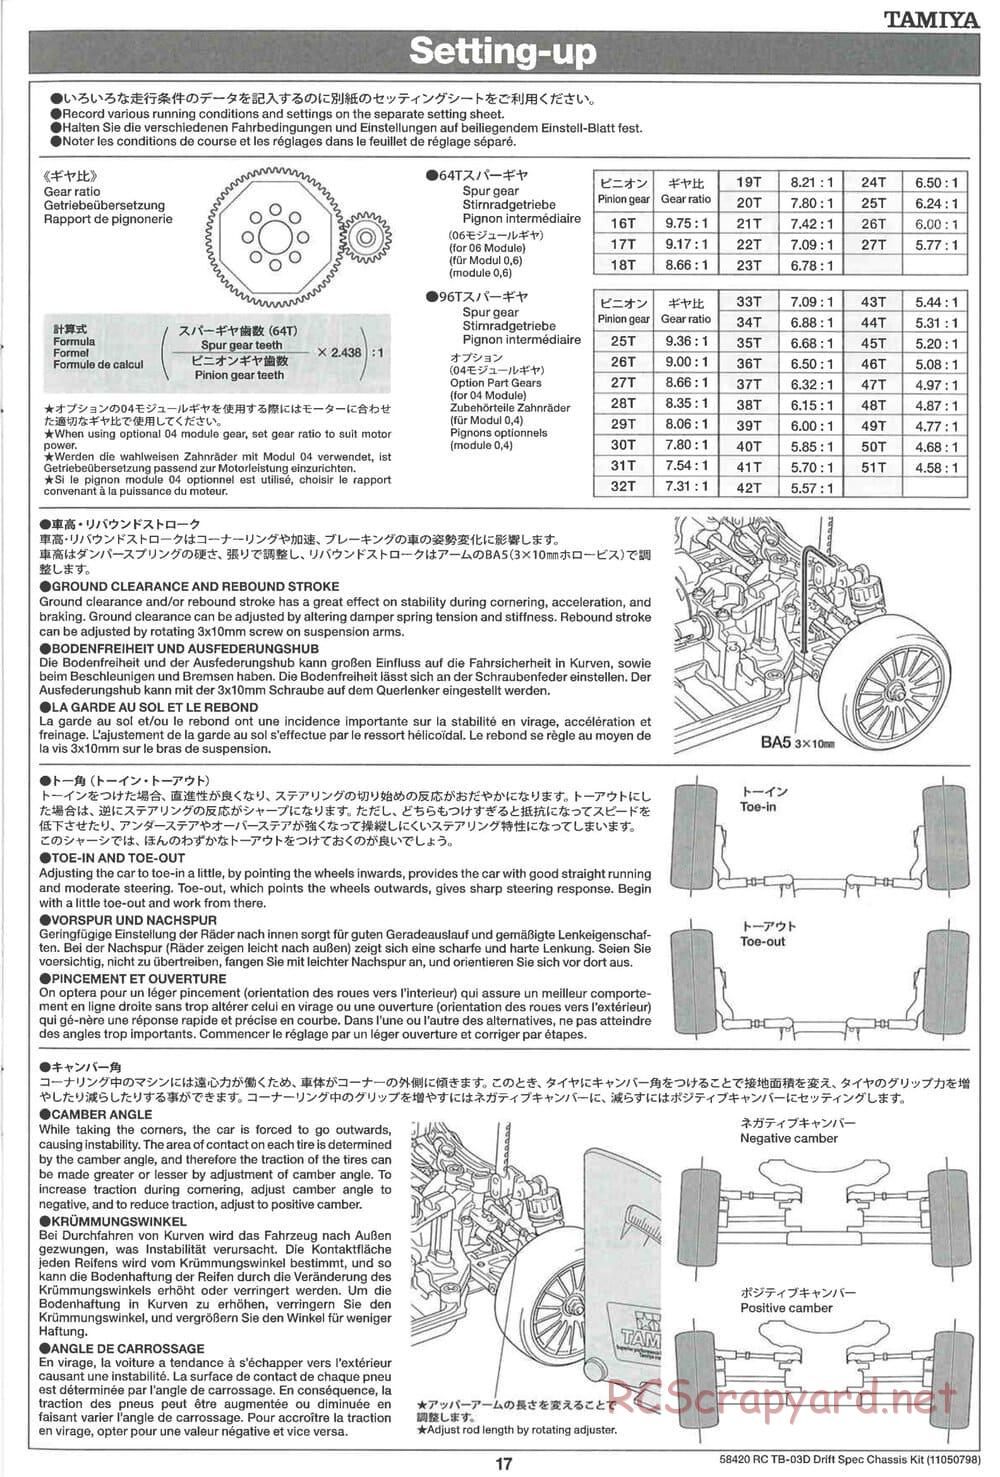 Tamiya - TB-03D HP Drift Spec Chassis - Manual - Page 17